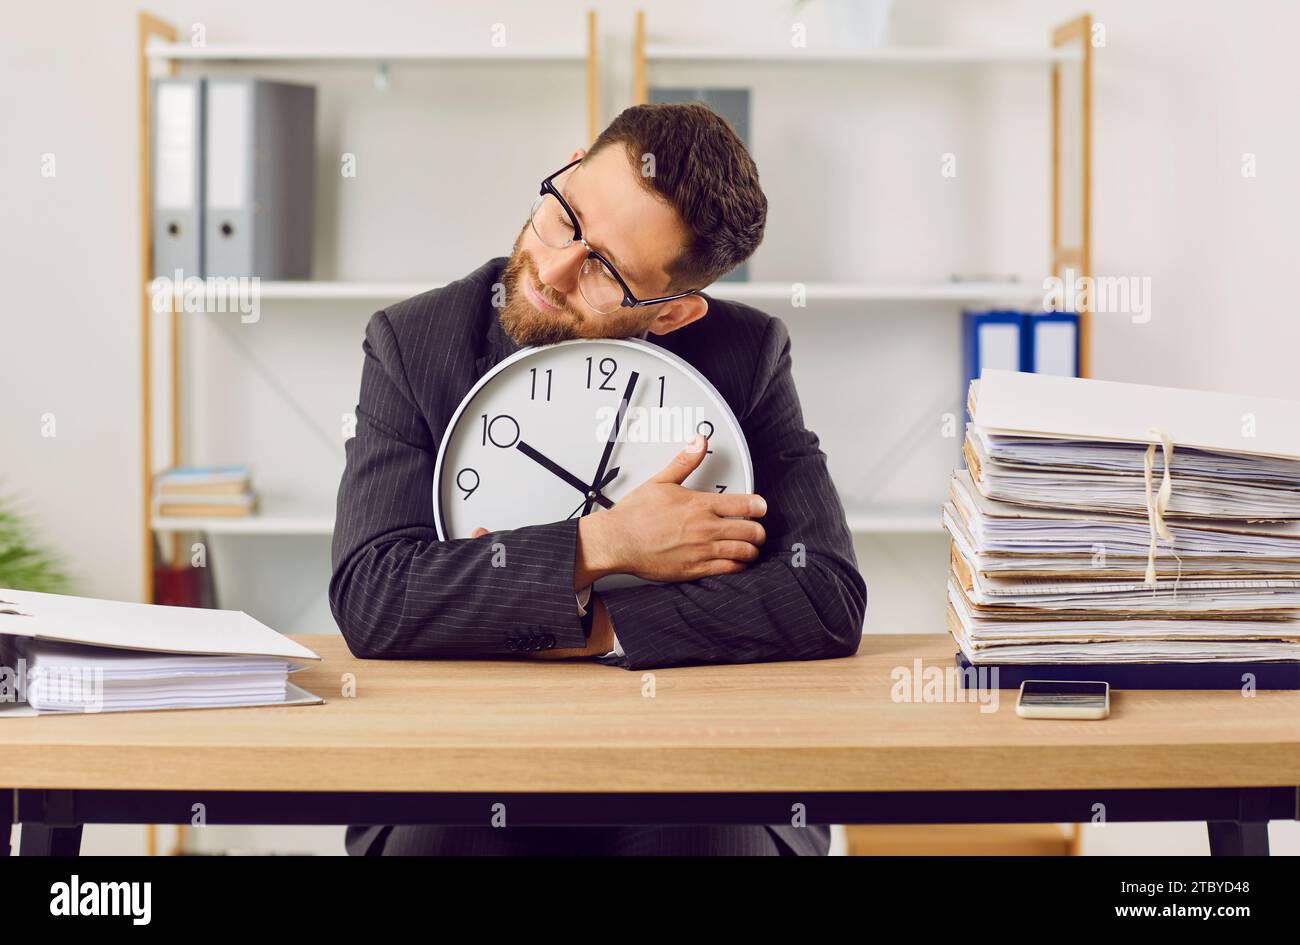 Funny, tired, overworked bookkeeper sitting at office desk, holding clock, and sleeping Stock Photo